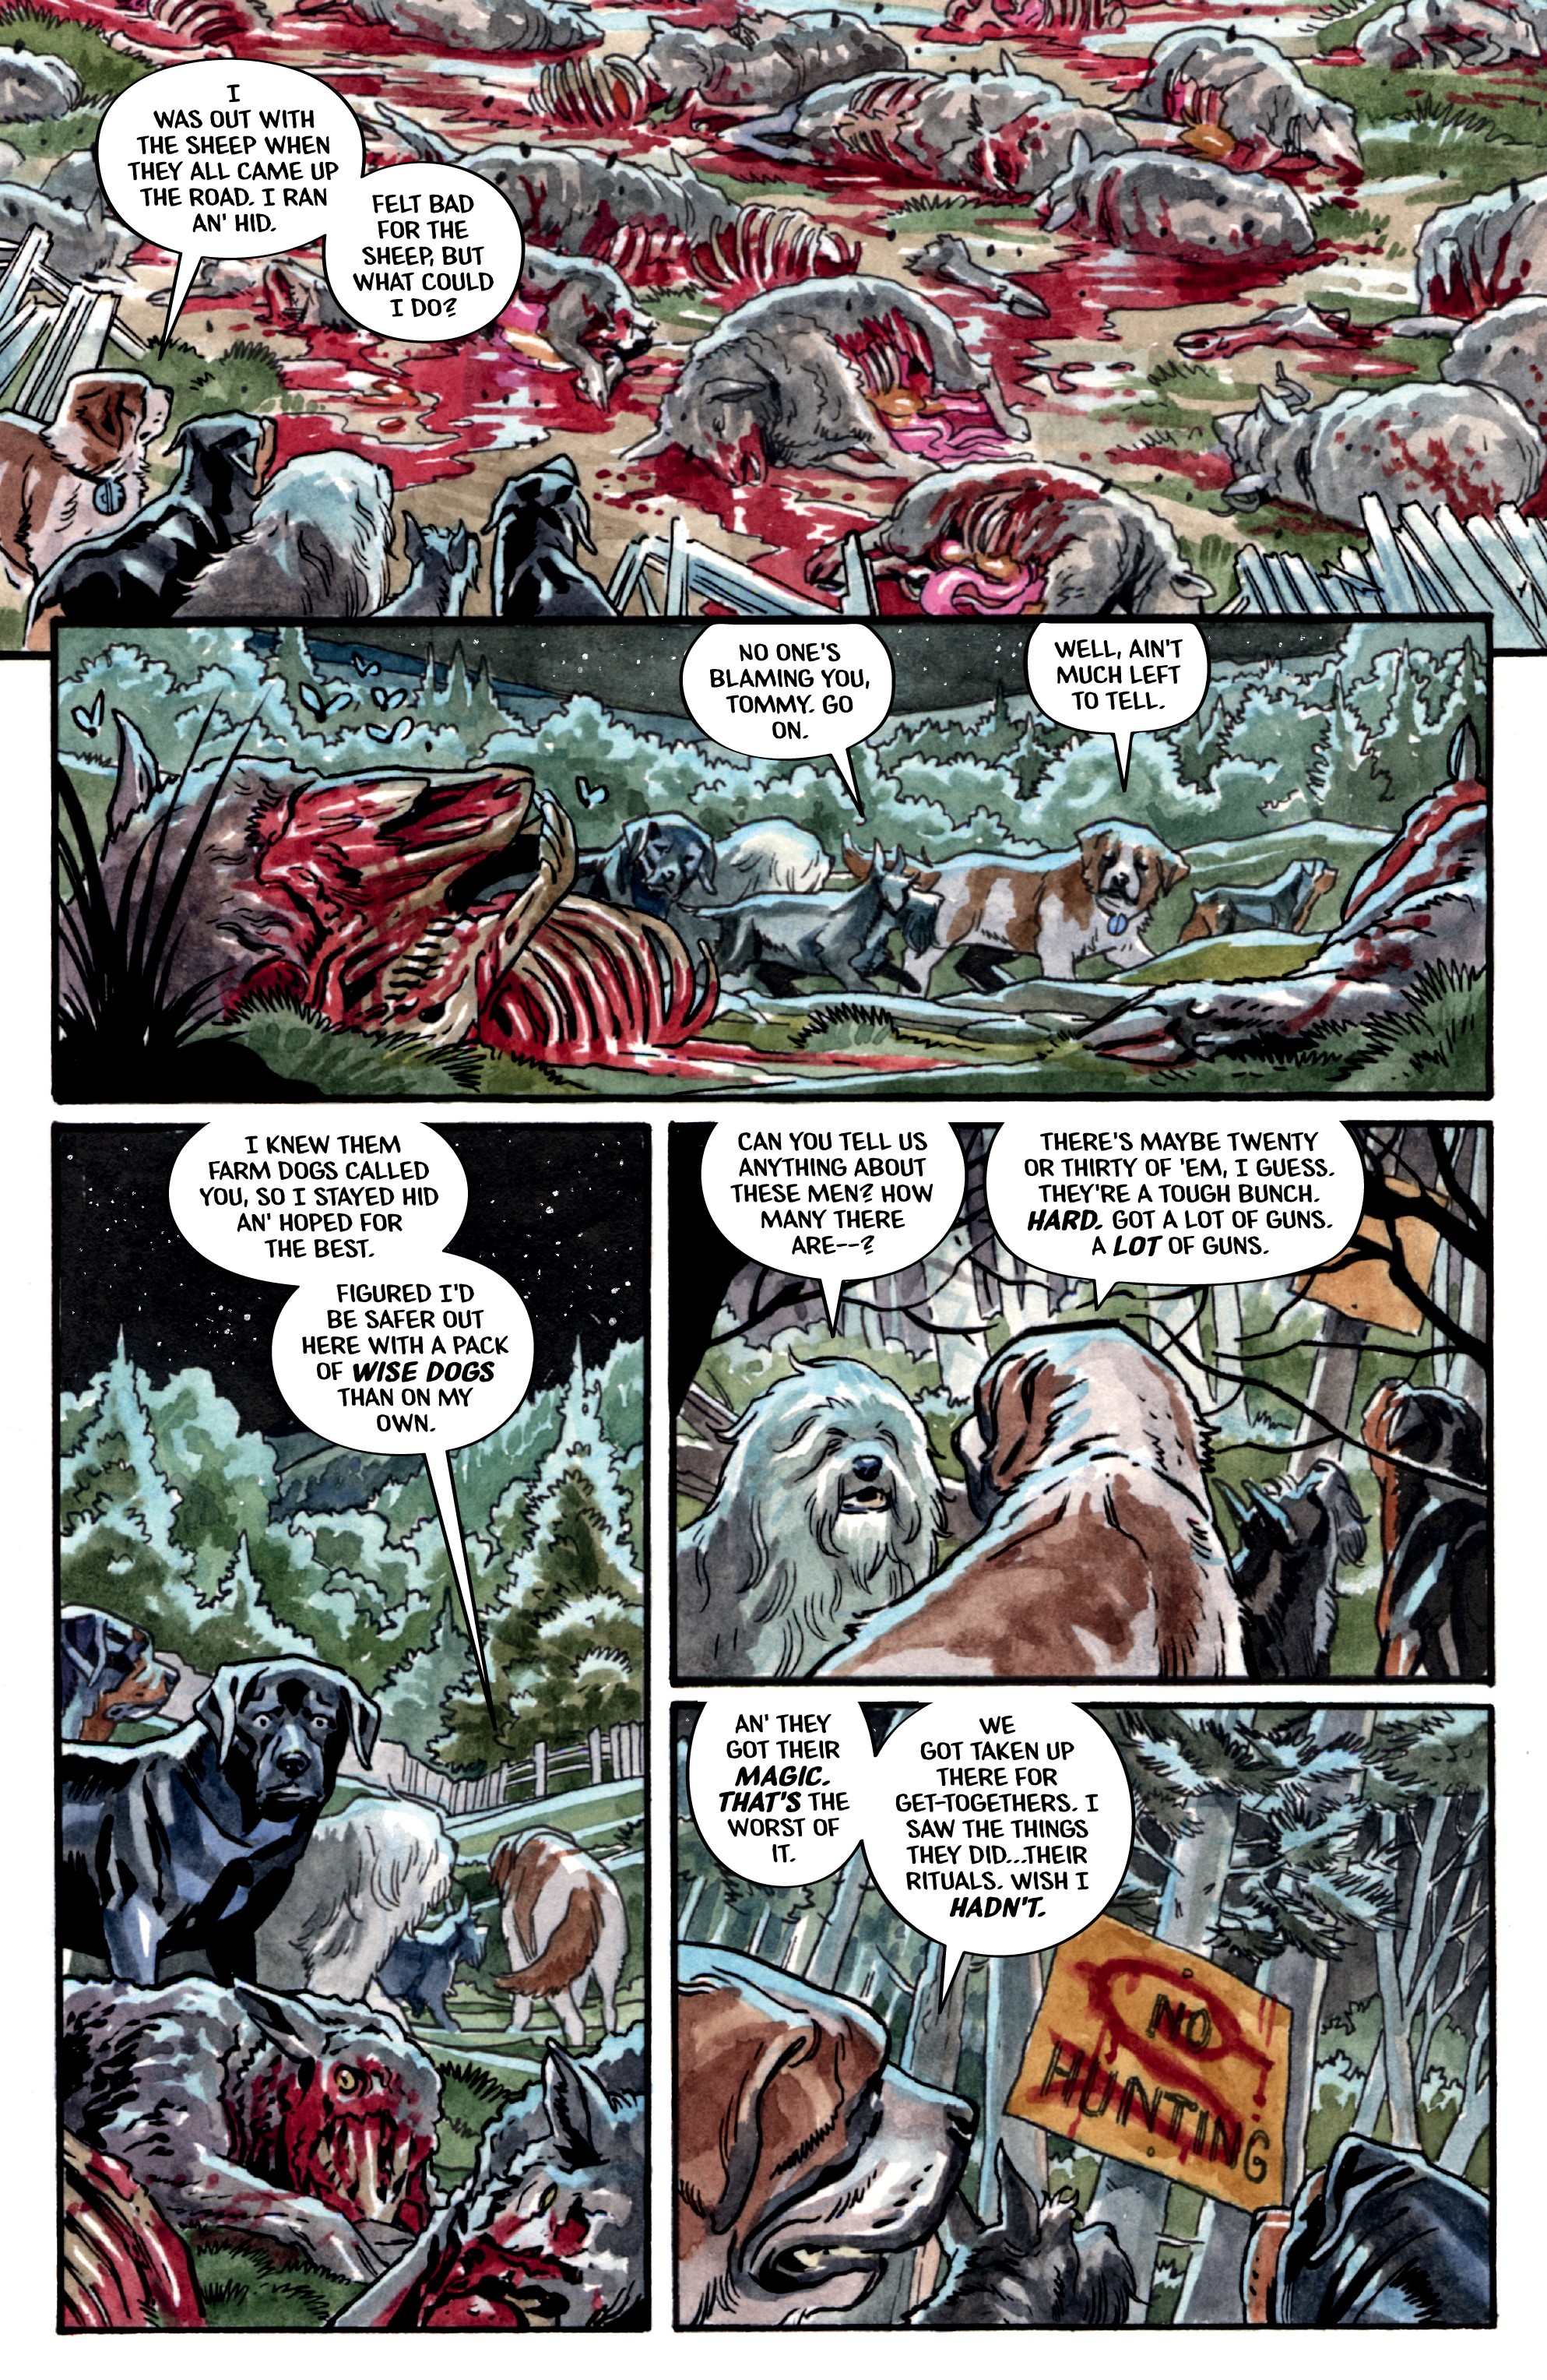 Beasts of Burden: Wise Dogs and Eldritch Men  (2018-): Chapter 3 - Page 4